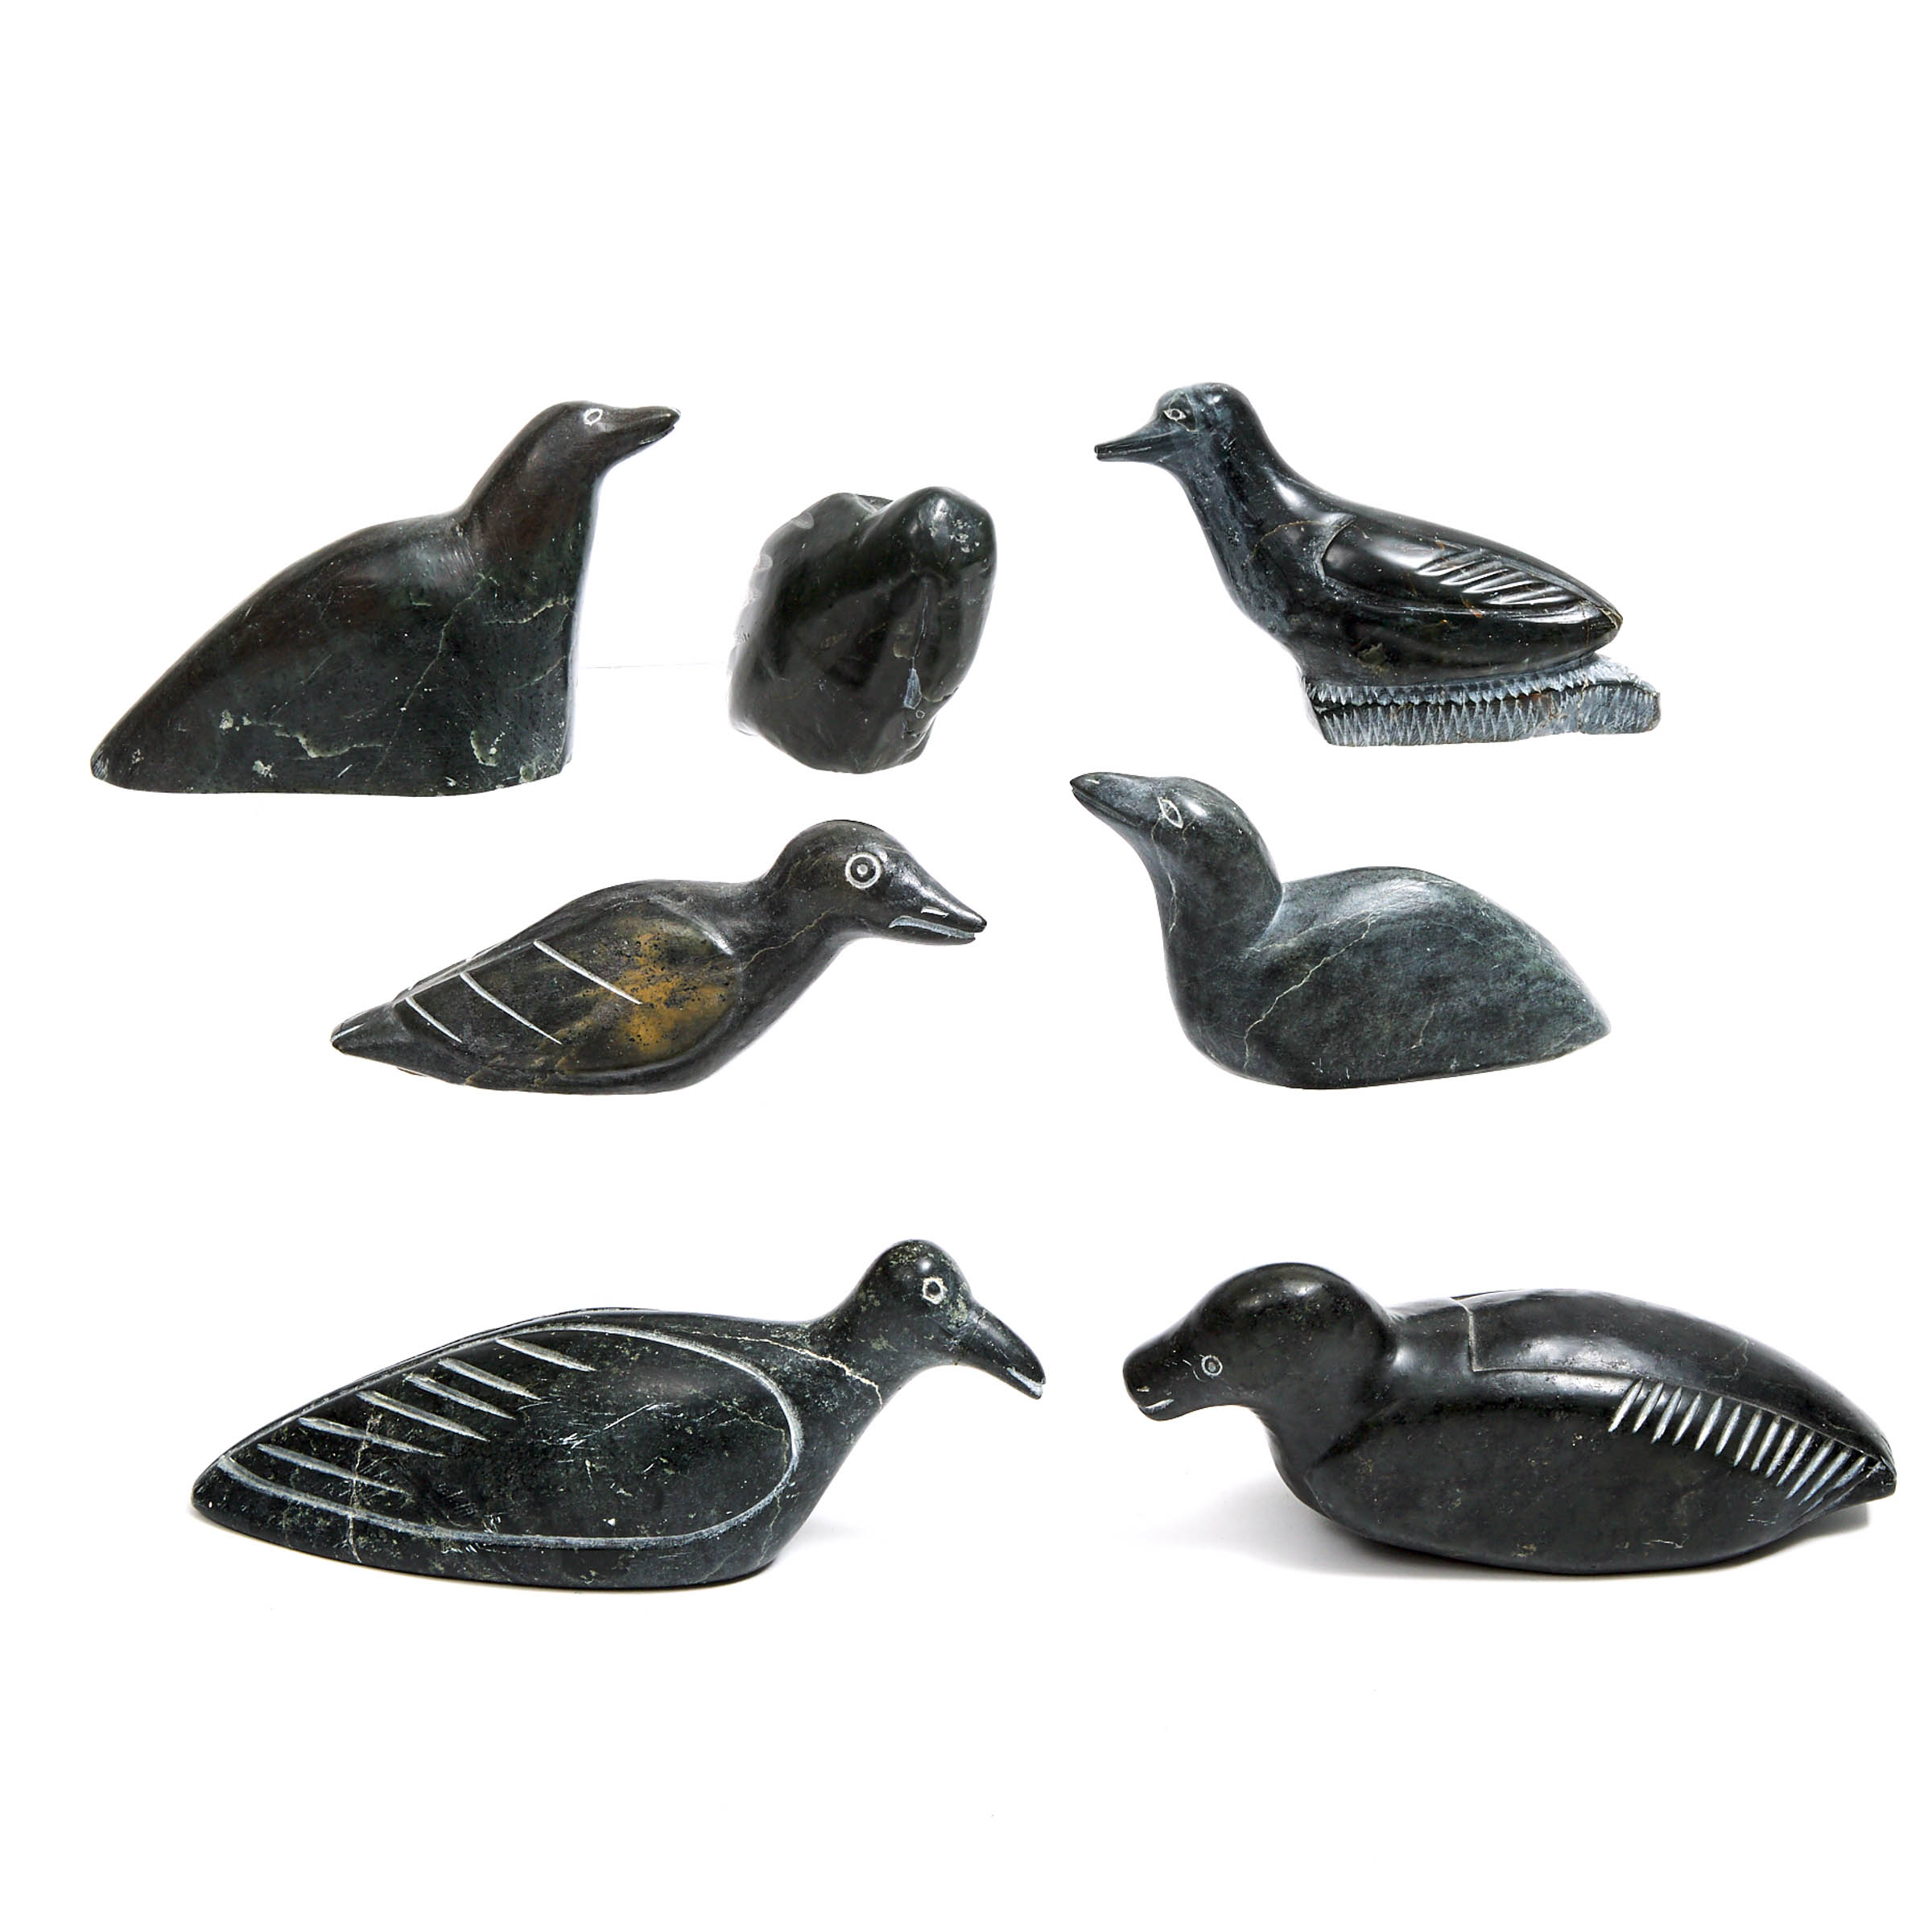 A COLLECTION OF SEVEN ARCTIC BIRD CARVINGS